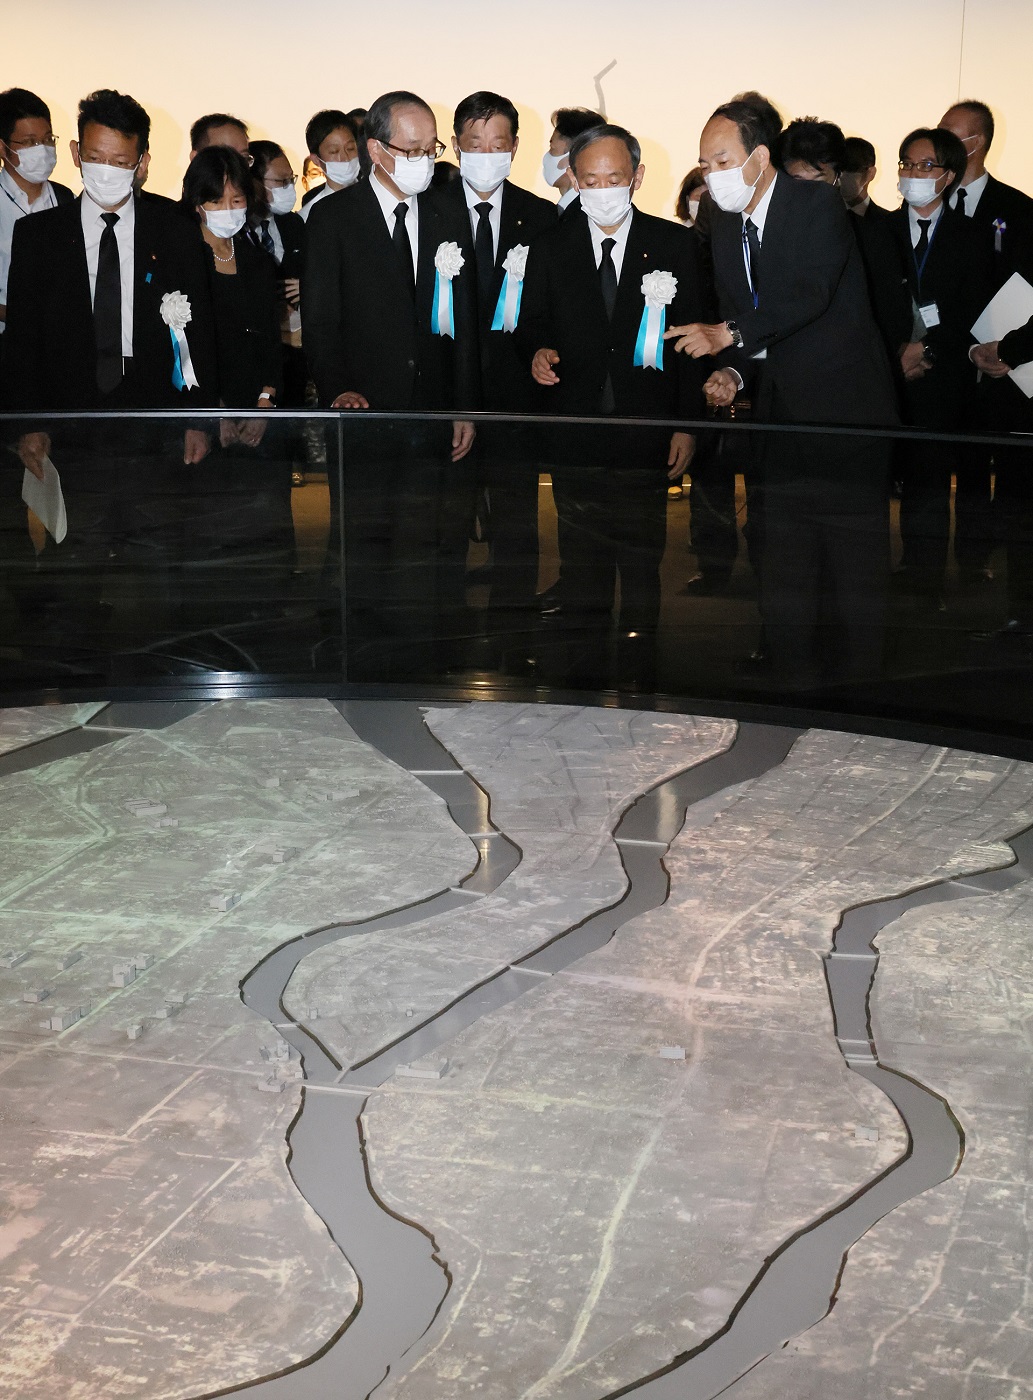 Photograph of the Prime Minister visiting the Hiroshima Peace Memorial Museum (1)